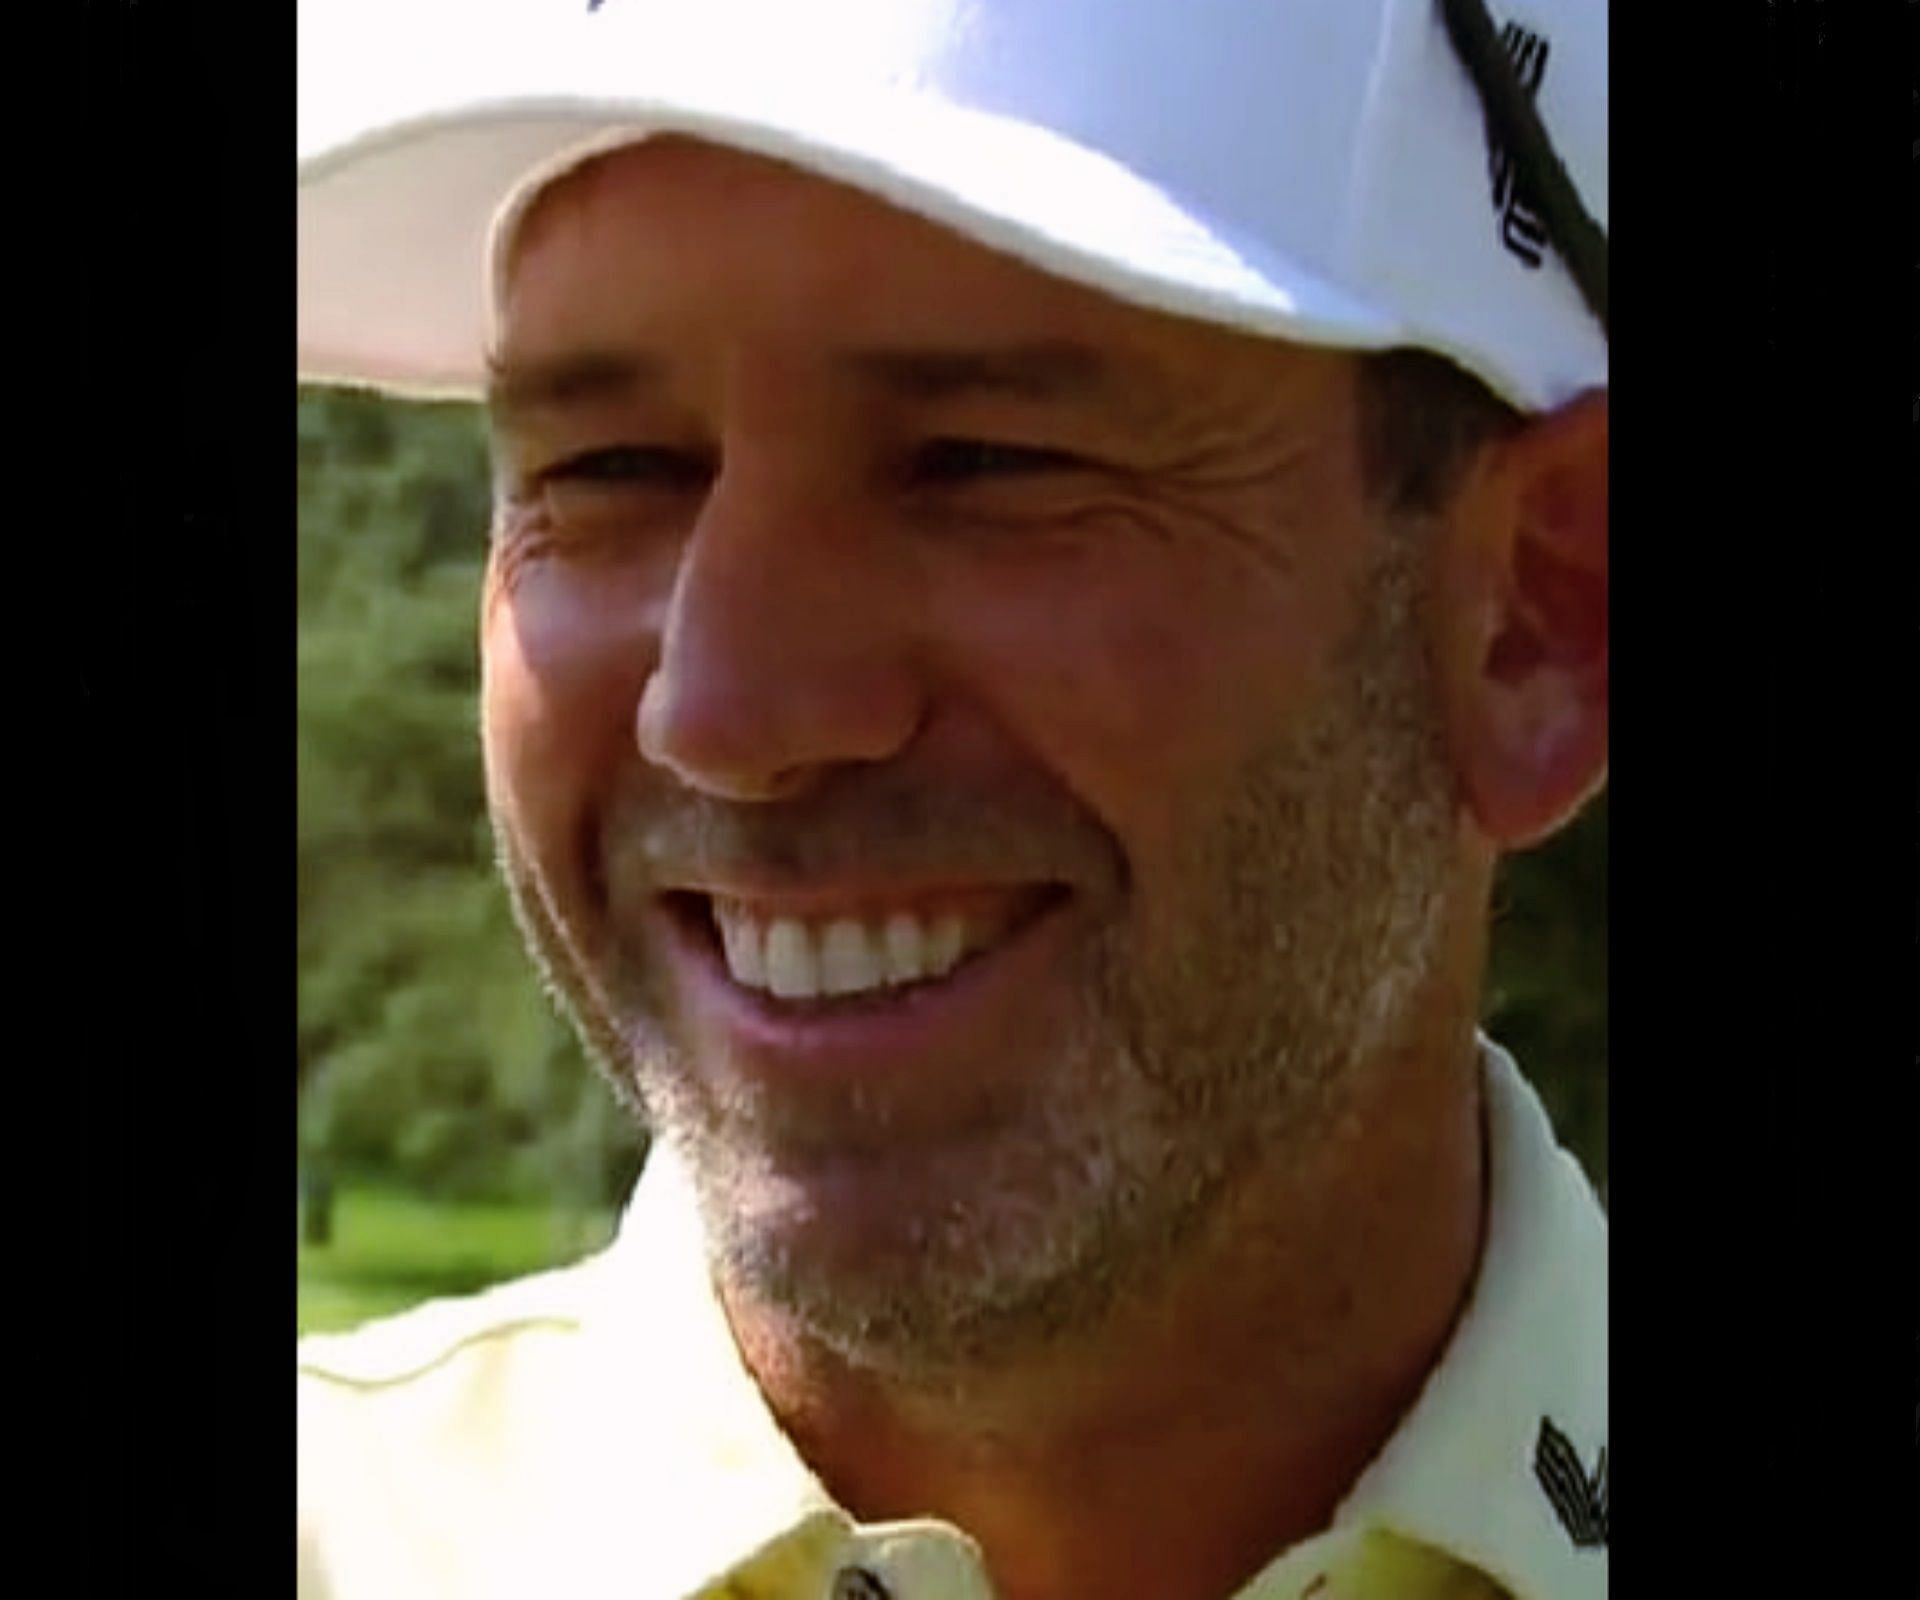 Sergio Garcia was happy with his performance today at Andalucia (Image via Twitter @livgolf_league).